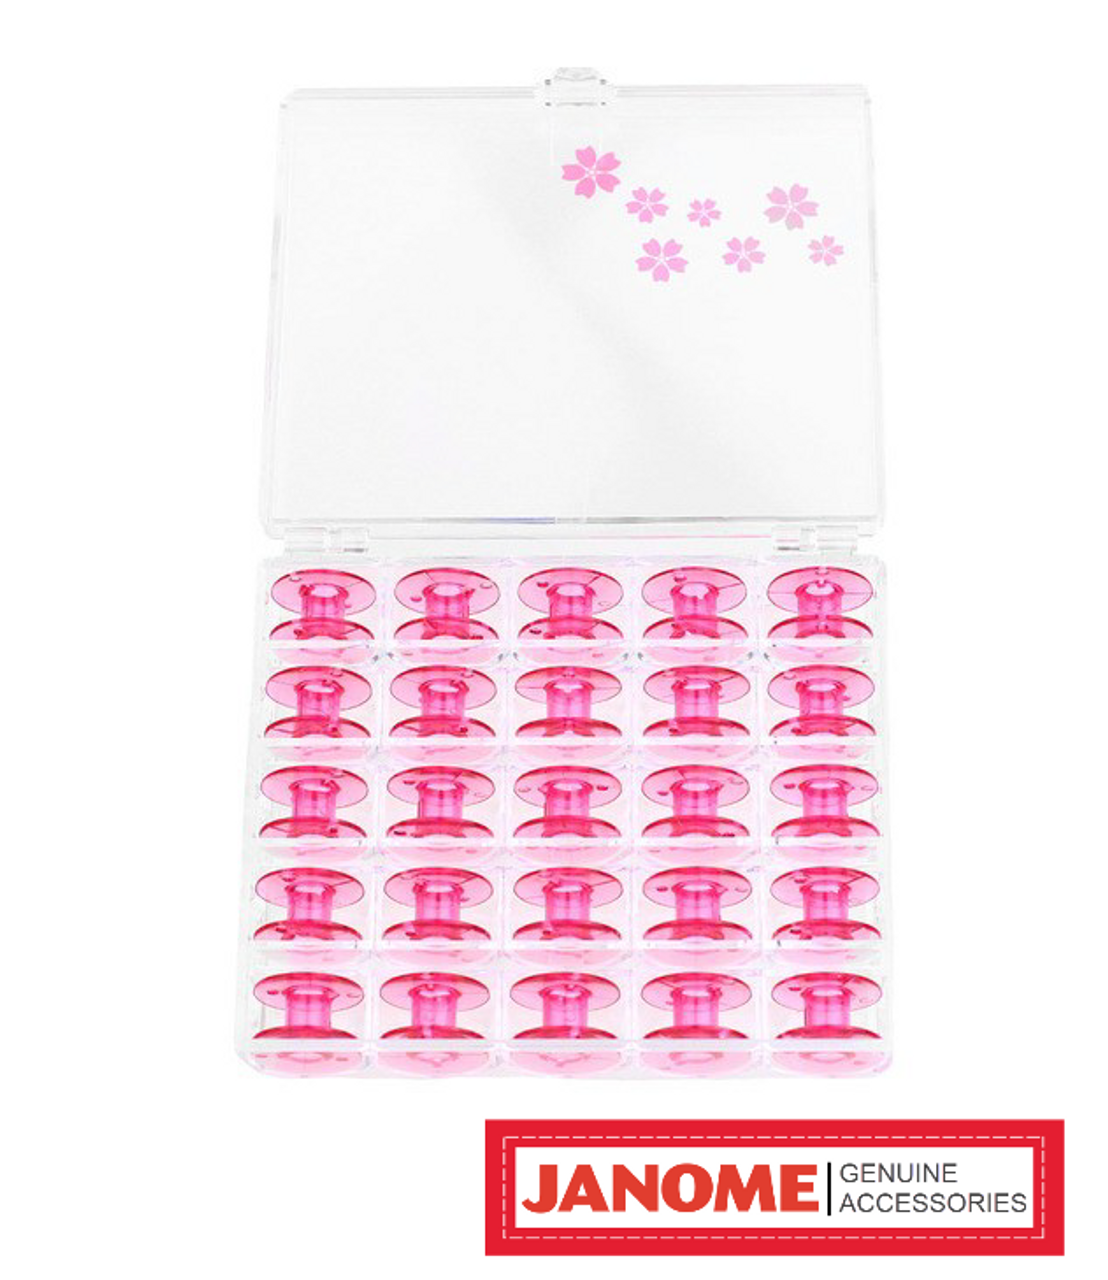 Janome Pink Cherry Blossom 25-Pack of Bobbins w/ Case 